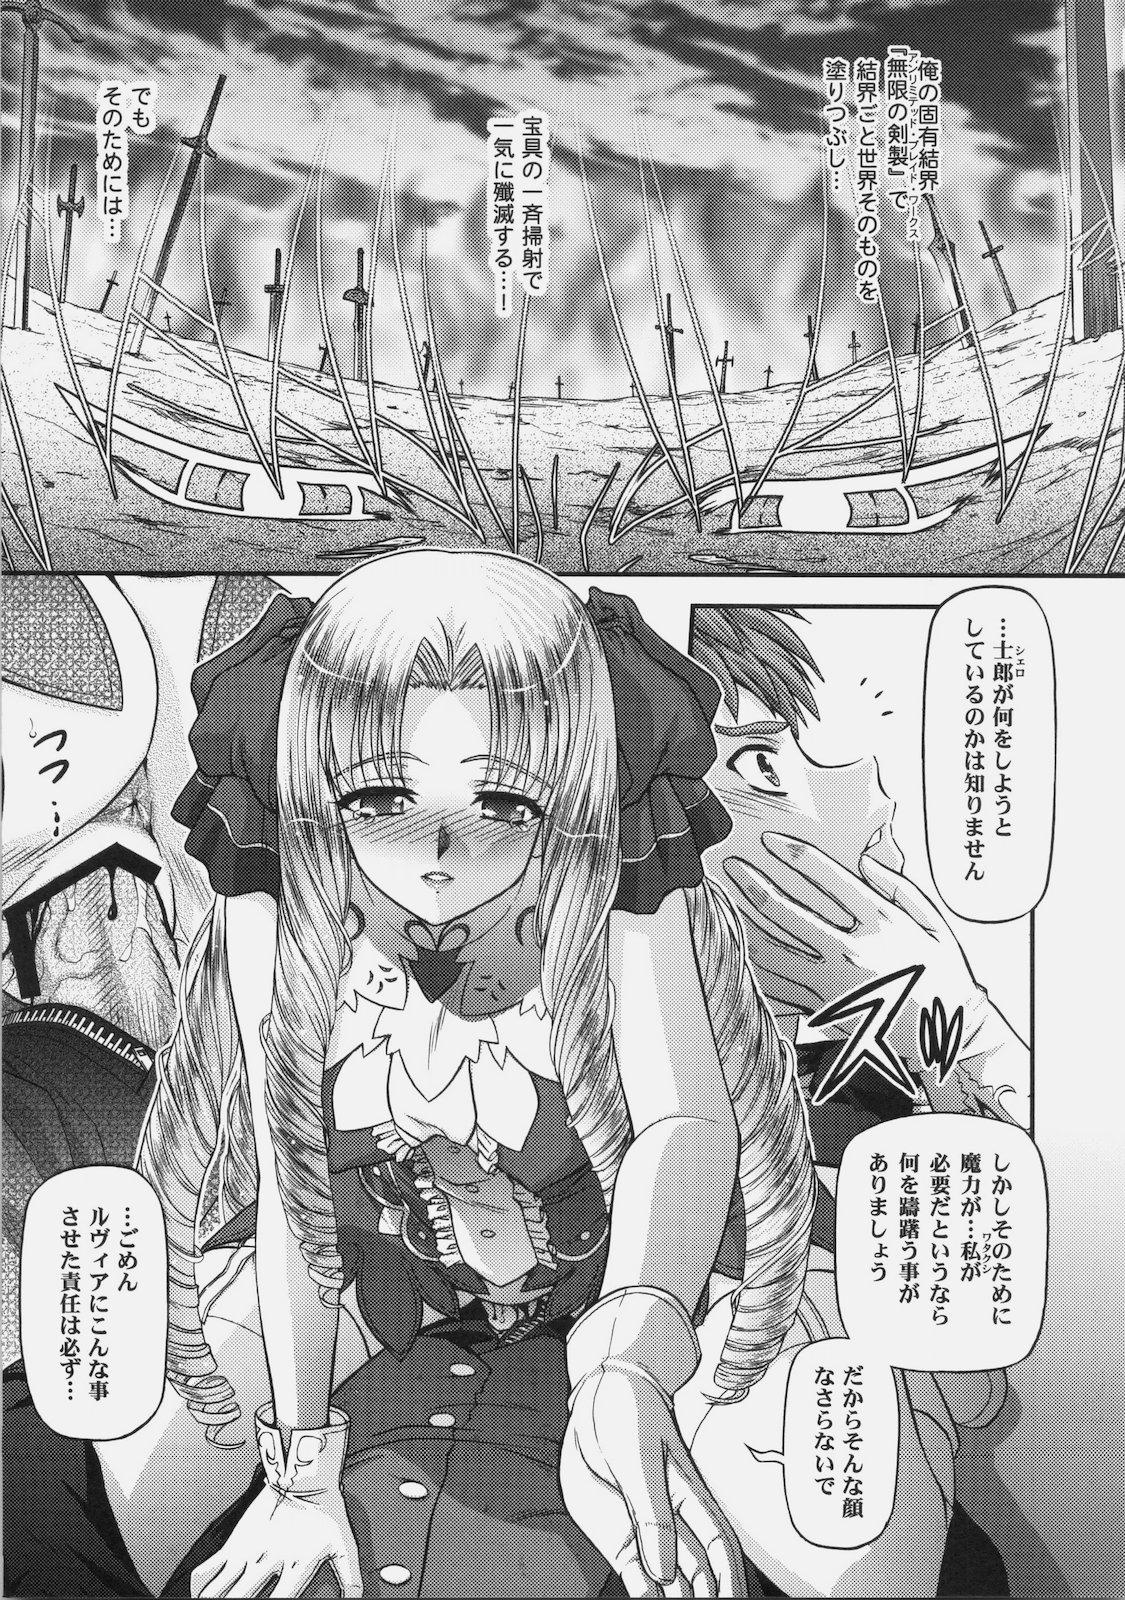 Hot Fucking BLUE BLOOD'S vol.26 - Fate hollow ataraxia Peeing - Page 9